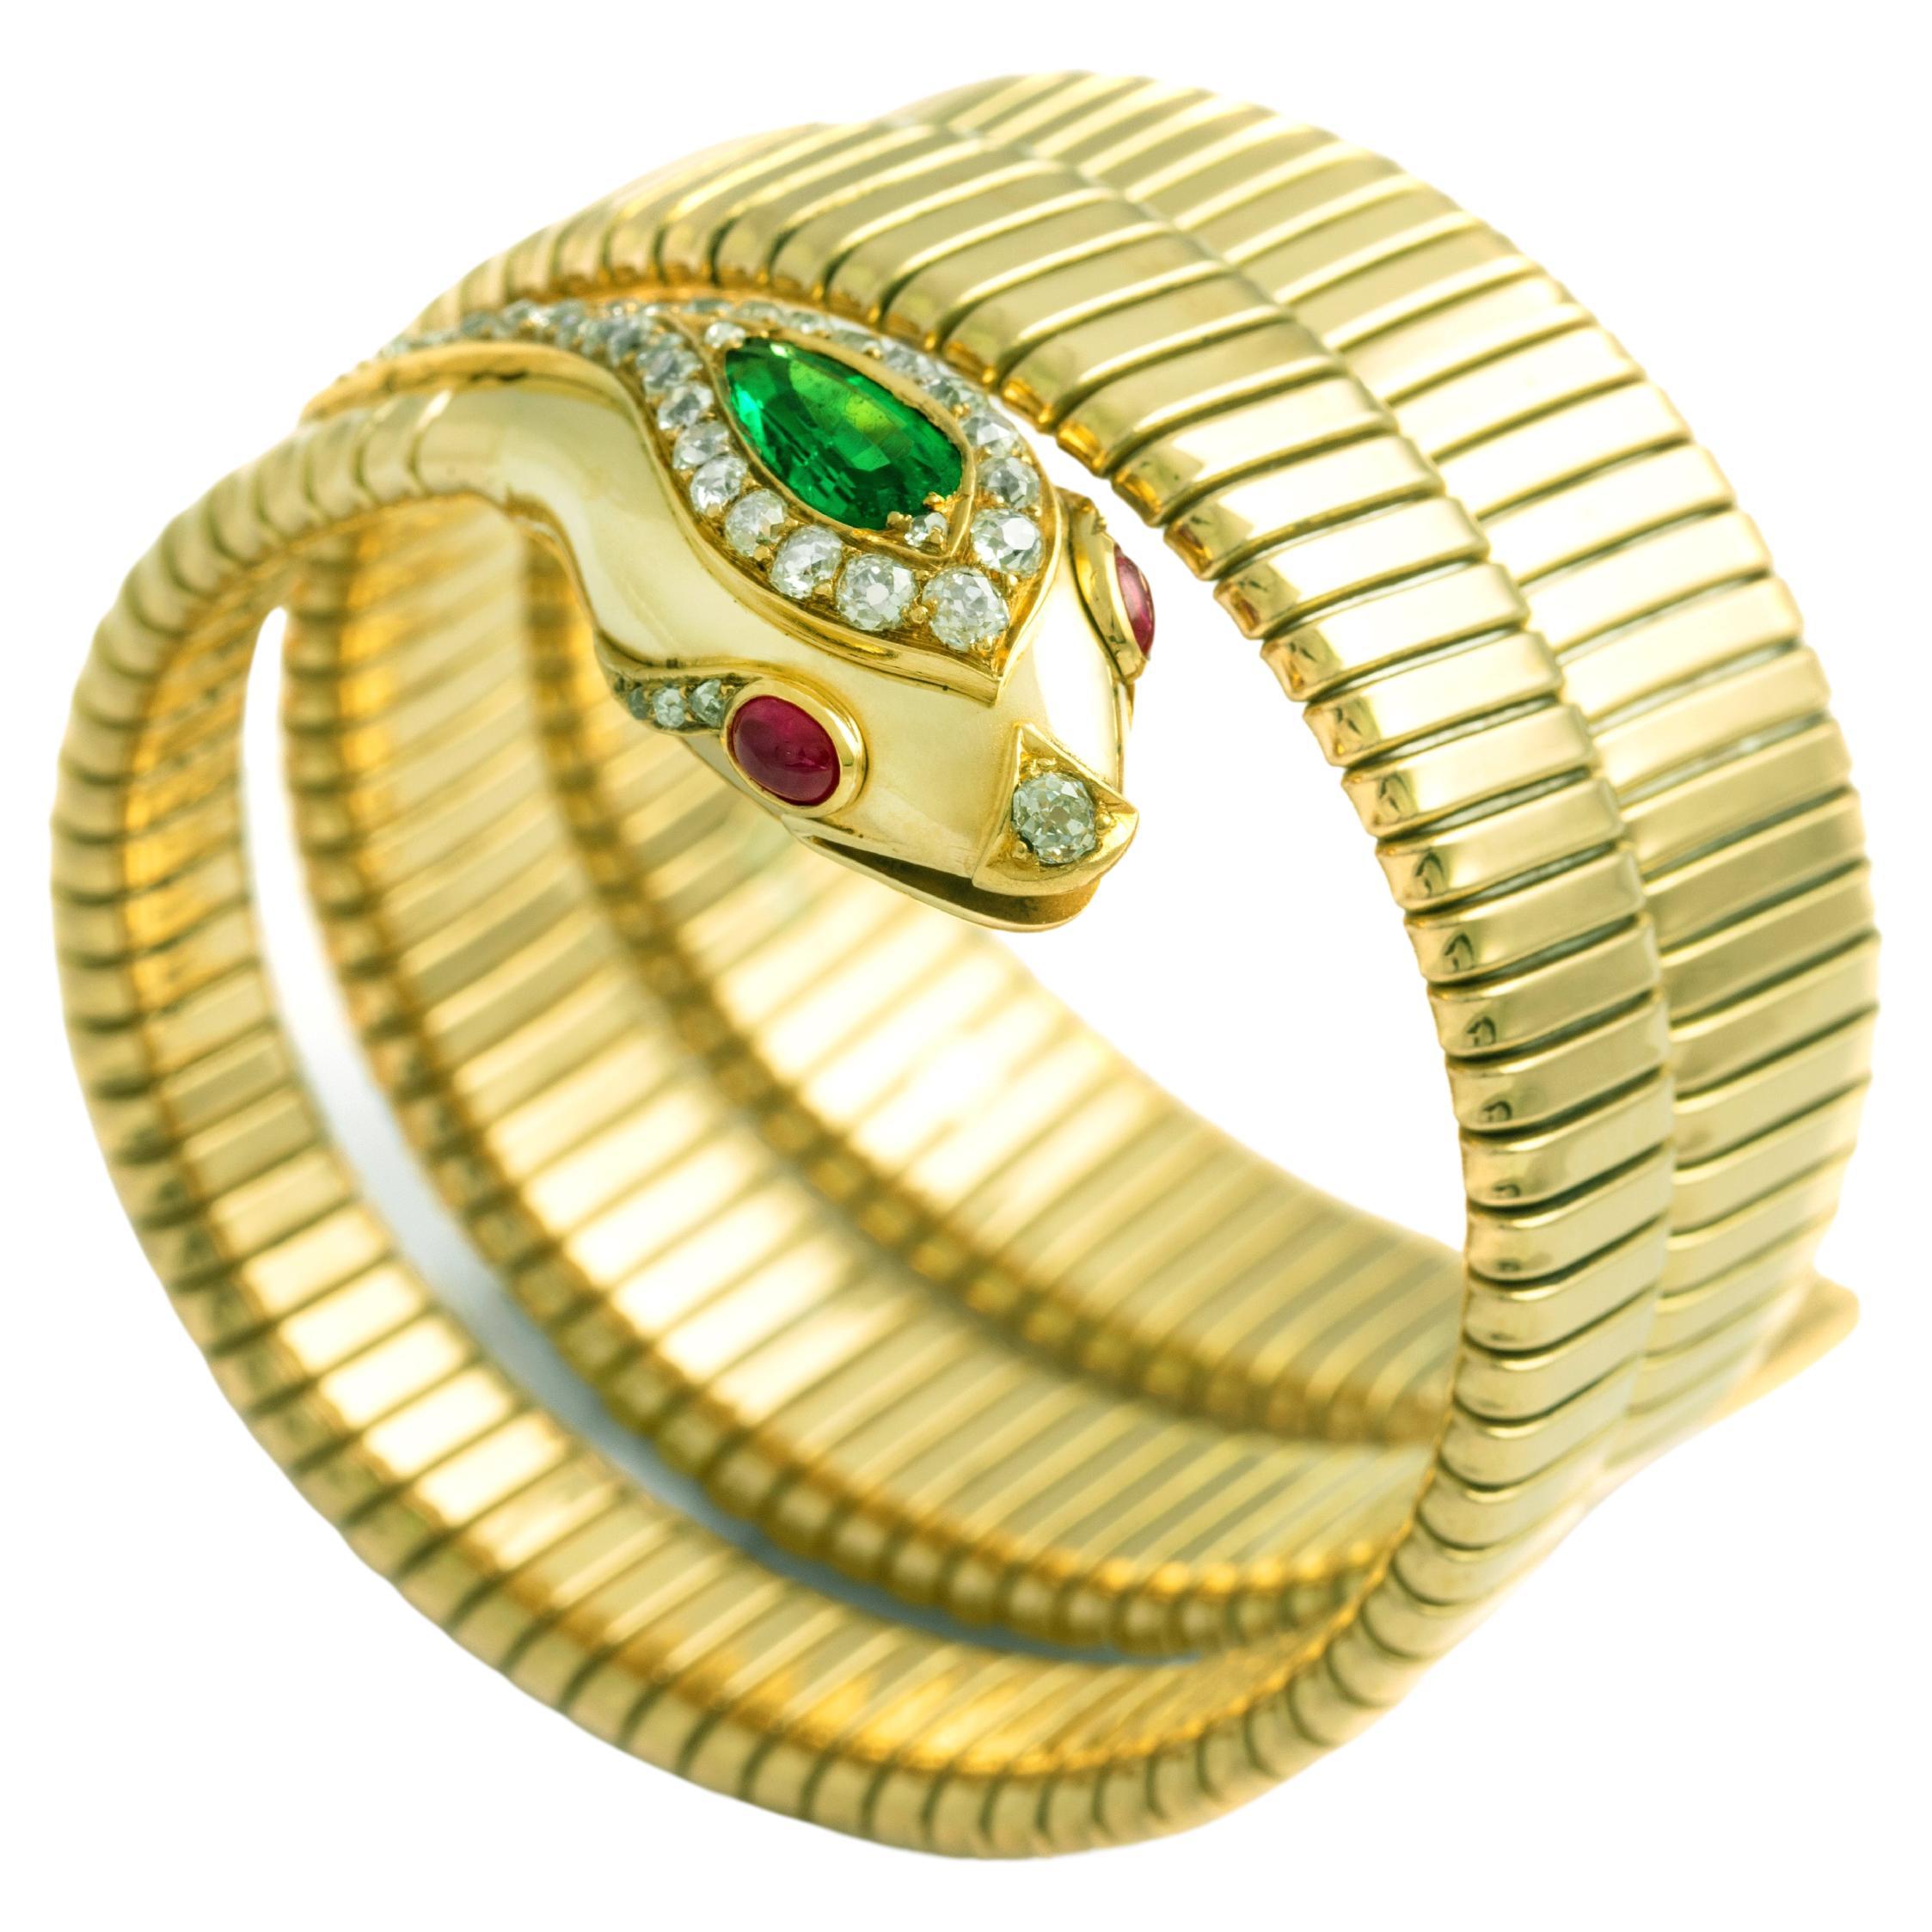 Snake yellow gold 18K tubogas bracelet.
Emerald old mine pear shape. Colombian origin.
Old mine cut diamonds.
Ruby cabochon eyes.

Bracelet flexible. Adaptable to all sizes.
Total gross weight: 63.40 grams.

The snake, symbolizing rebirth and